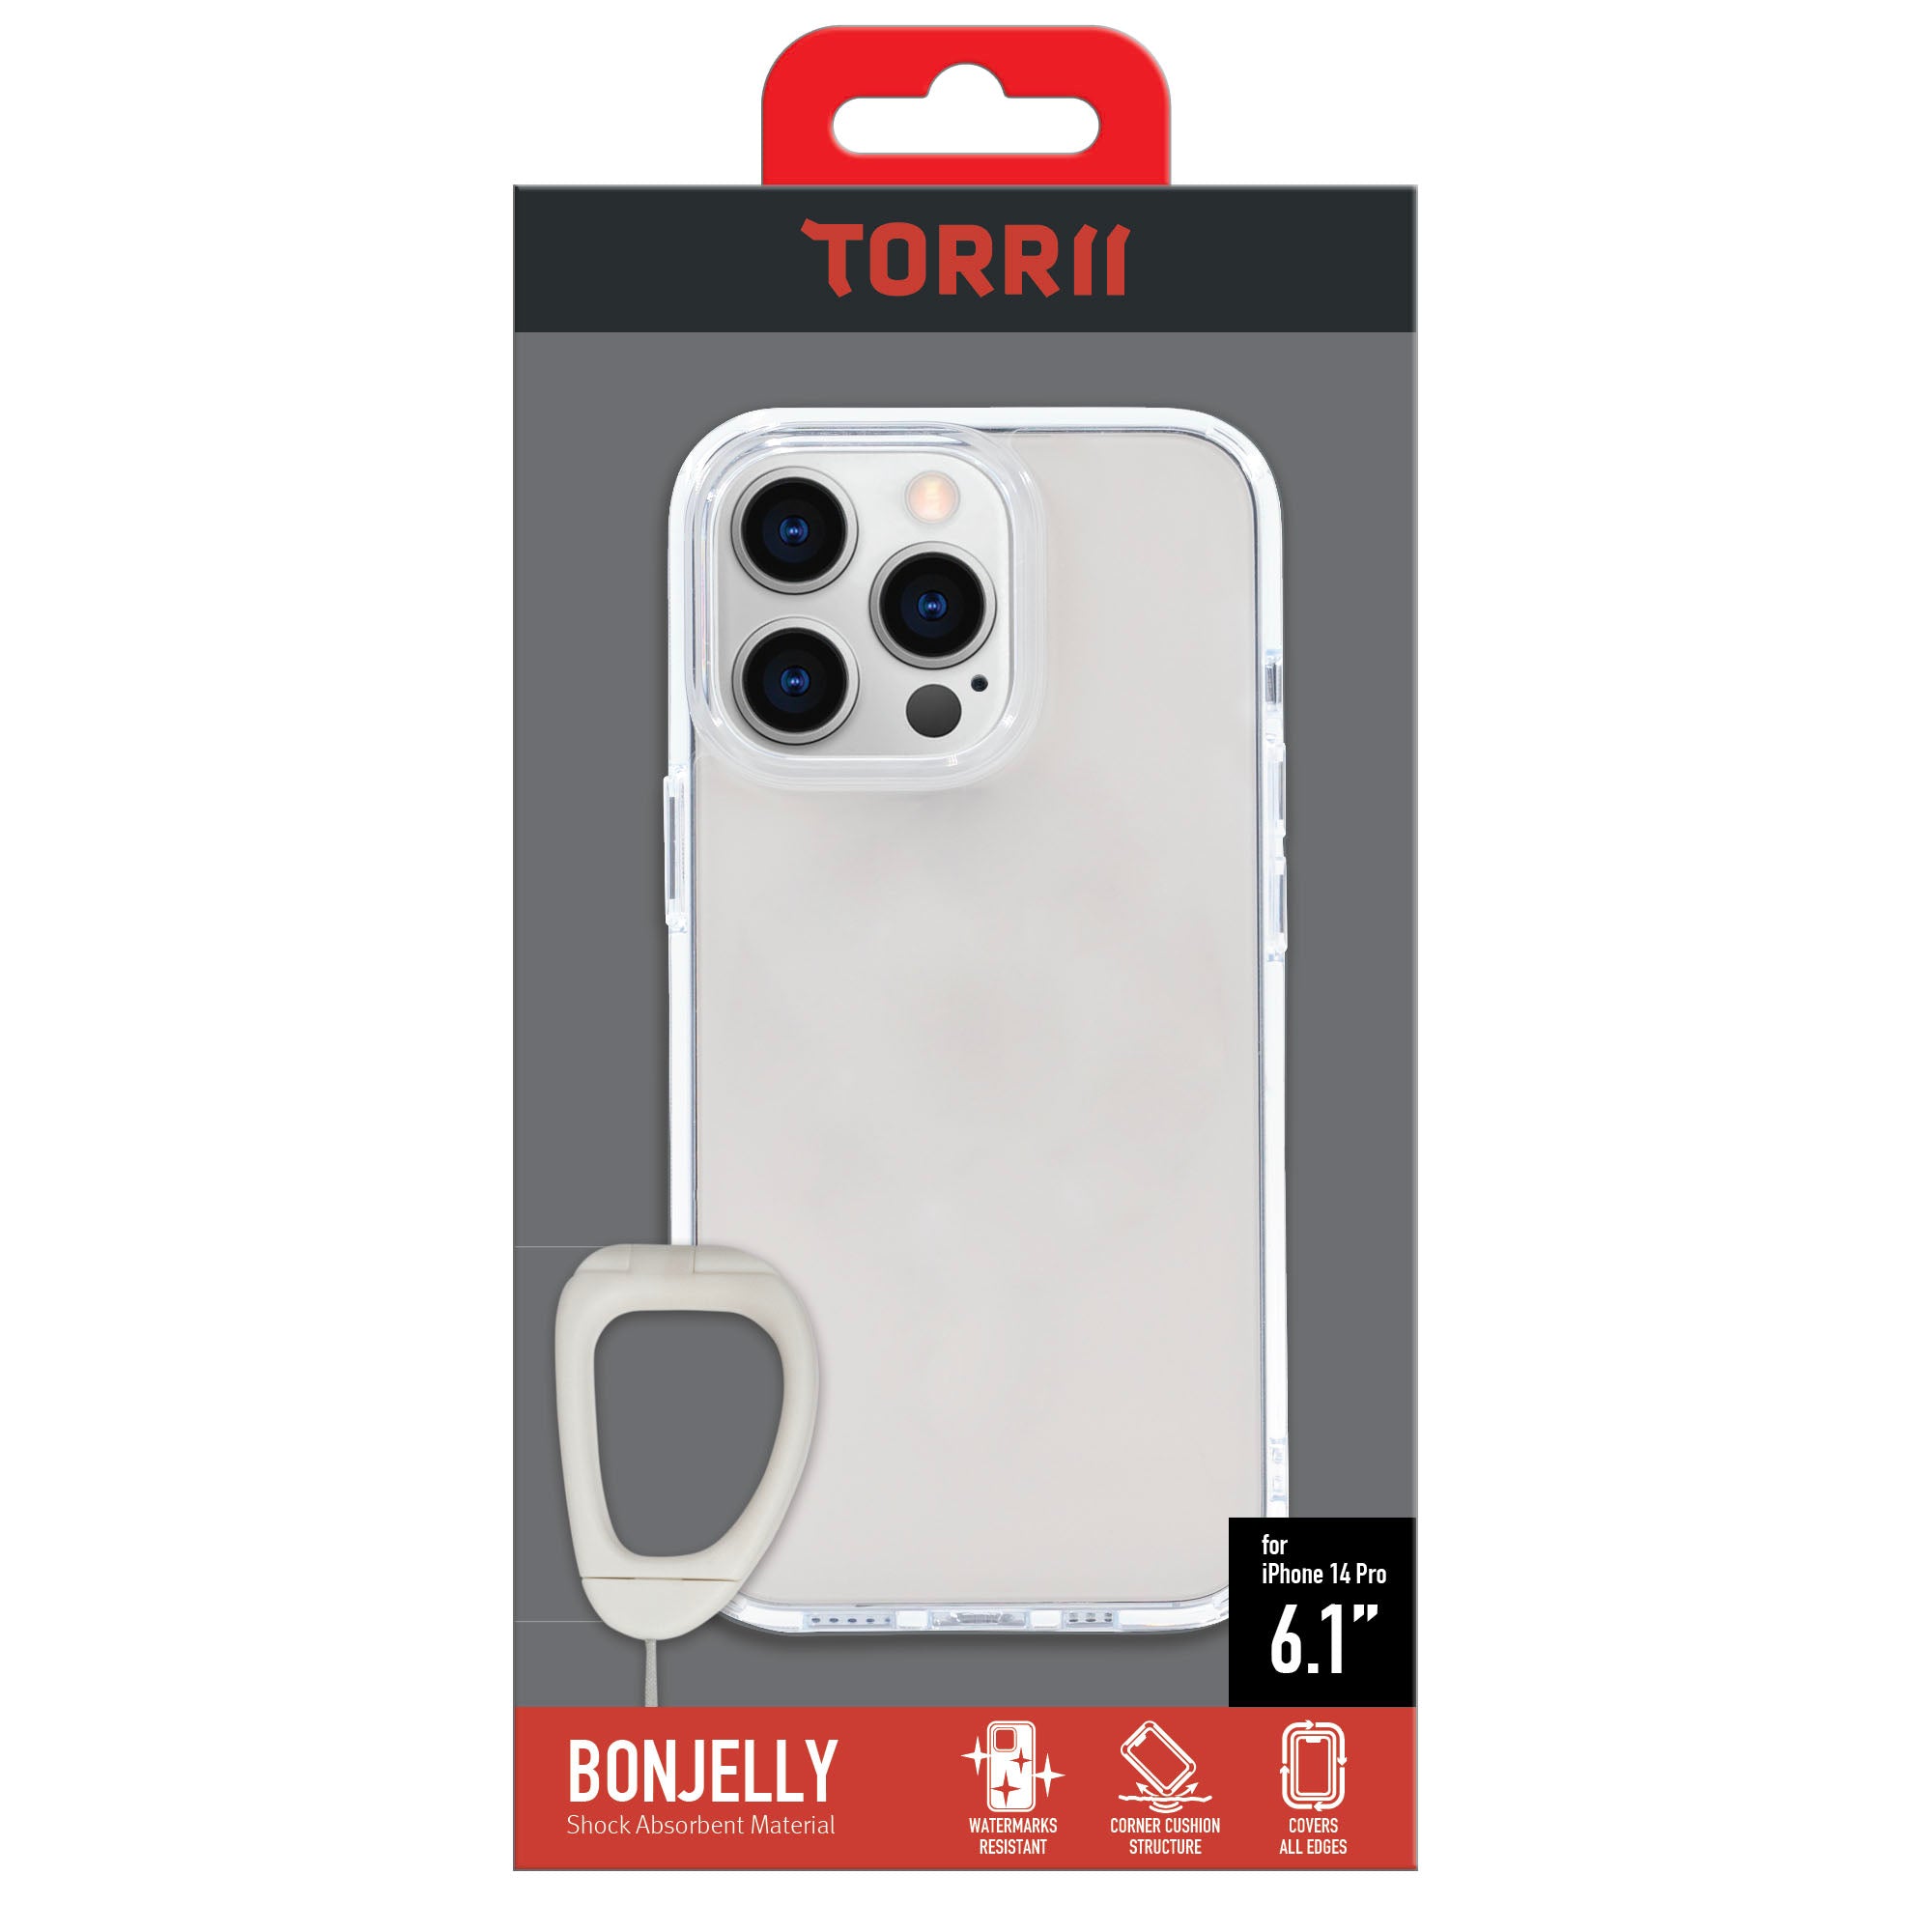 Torrii Bonjelly Case Anti-Bacterial Coating For iPhone 14 Pro - Clear